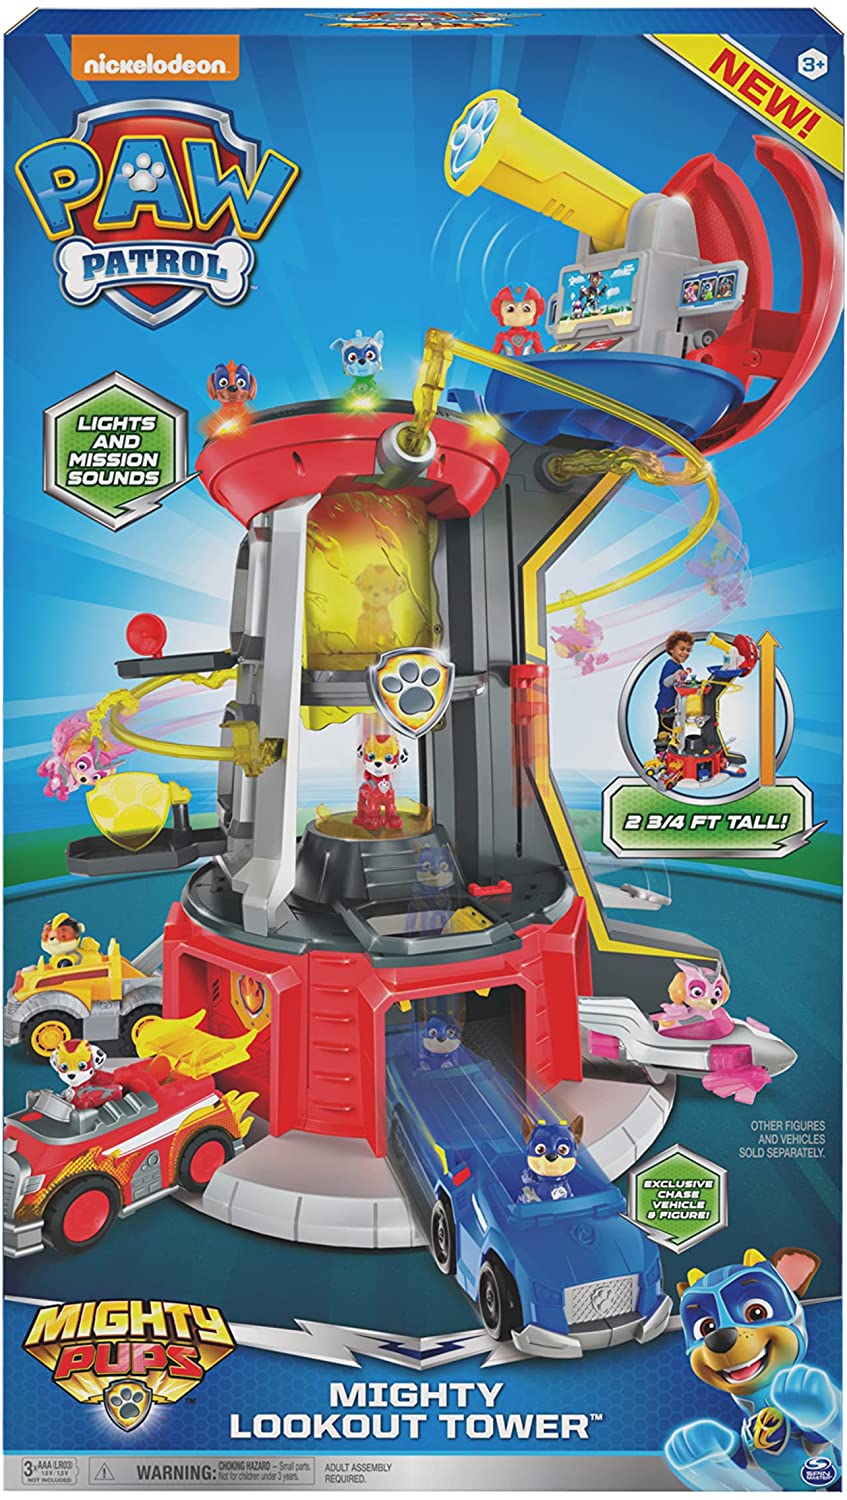 Paw Patrol Mighty Pups Super Paws Lookout Tower Playset New with Box